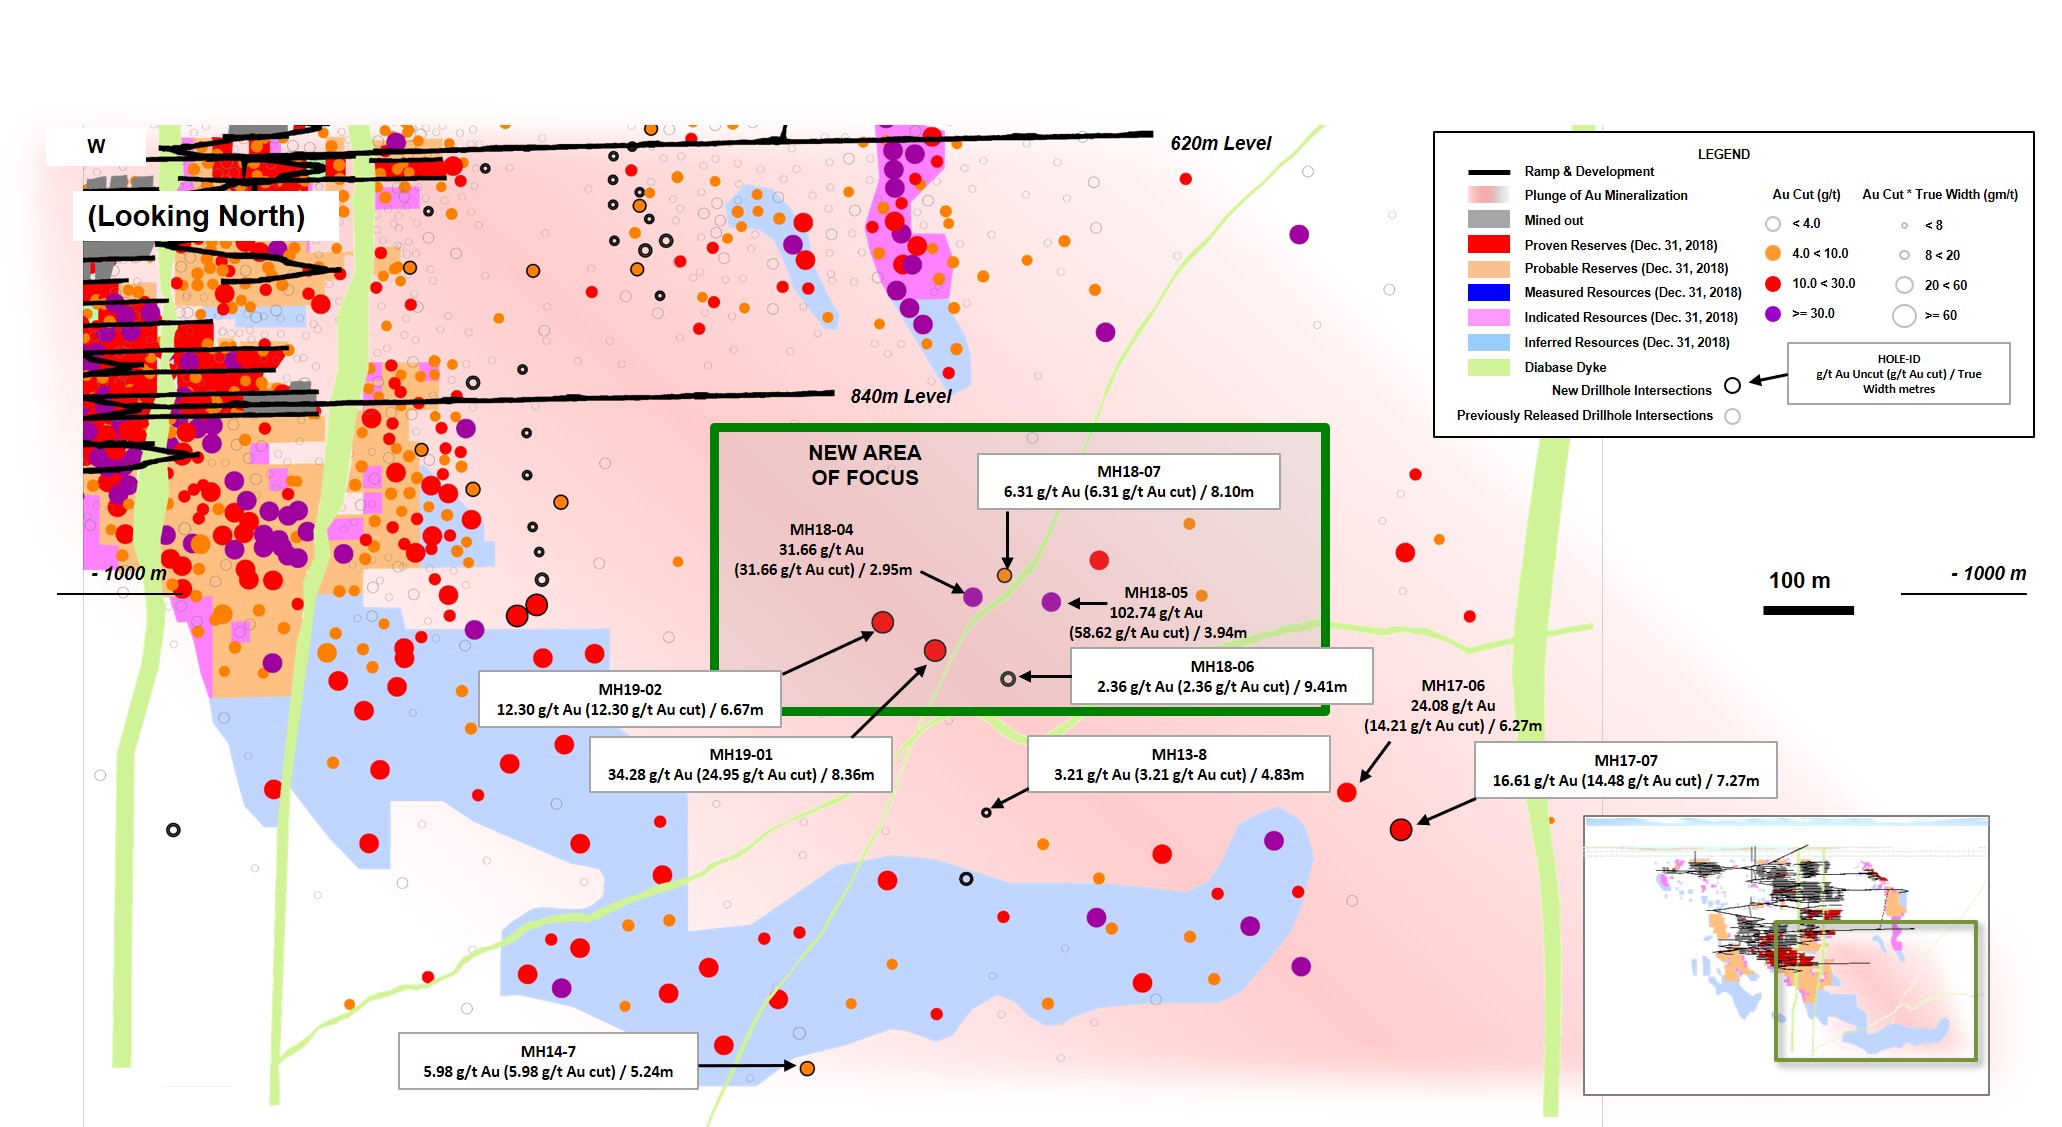 Figure 2 - Island Gold Mine Longitudinal Main and Eastern Extensions - Surface Directional Drilling Results